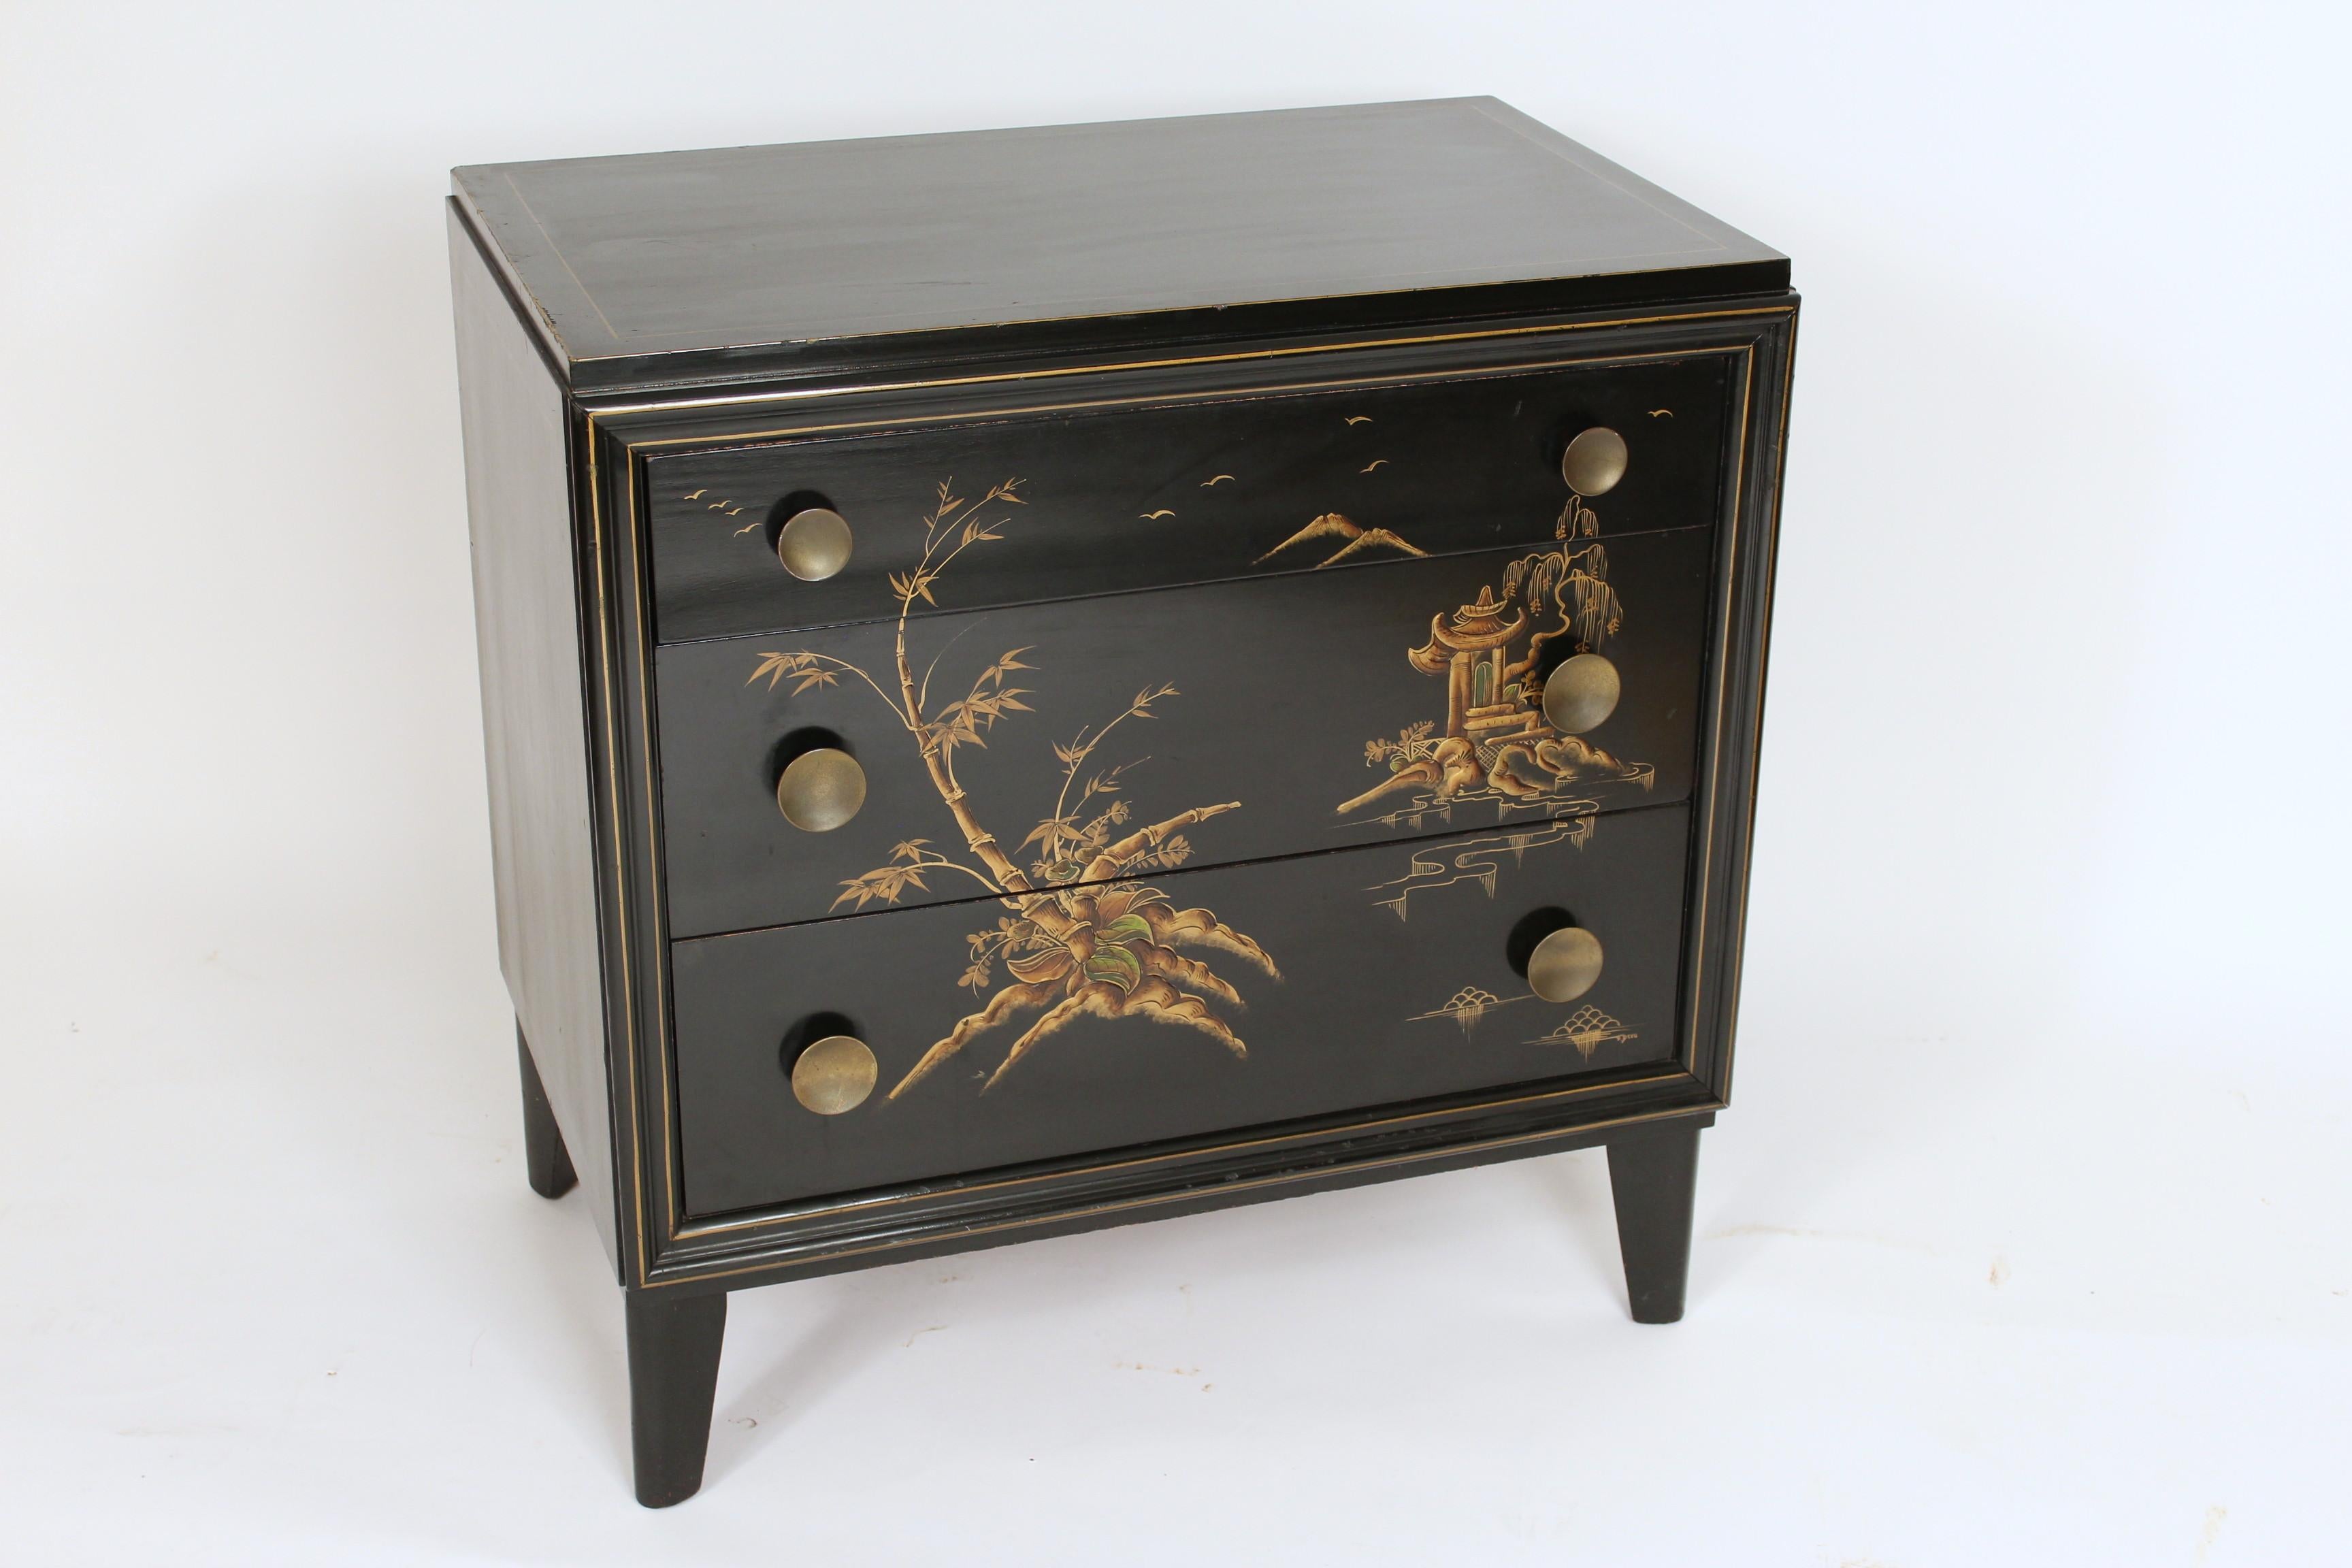 Pair of Mid-Century Modern chinoiserie decorated black lacquer two drawer chests of drawers, circa 1950s. With raised chinoiserie decorations, brass knobs and signed P. Deeg.